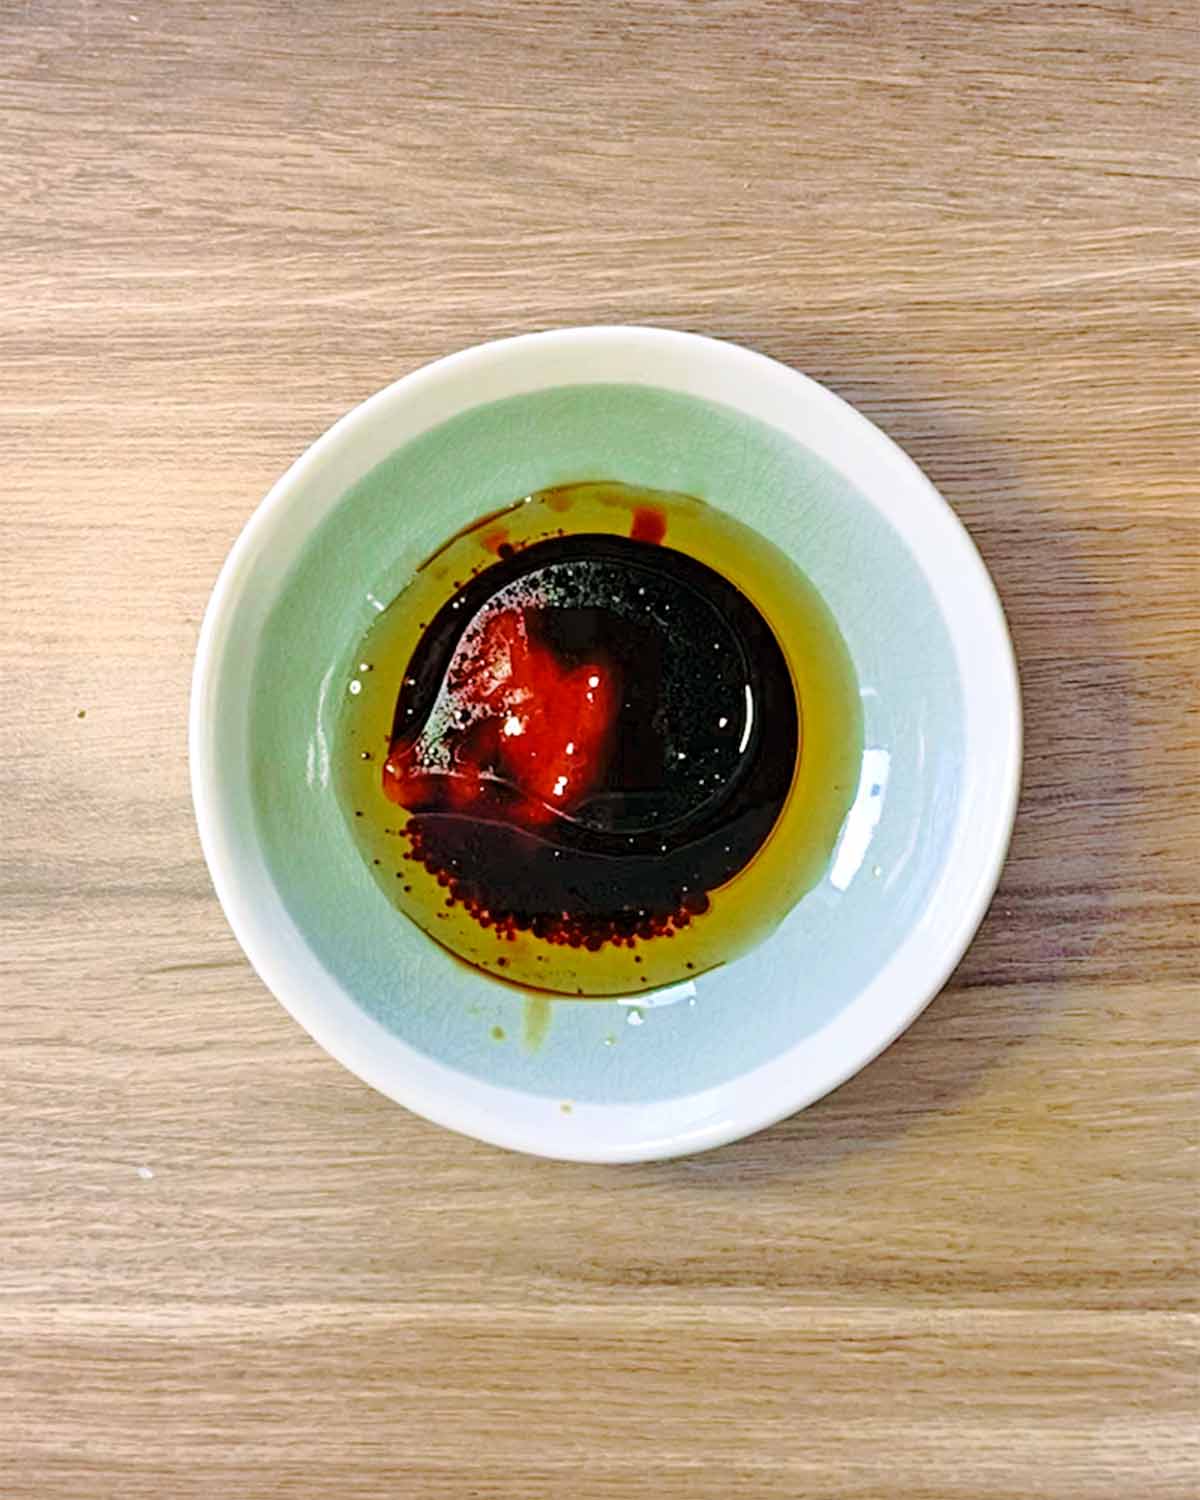 A small bowl of soy based sauce.